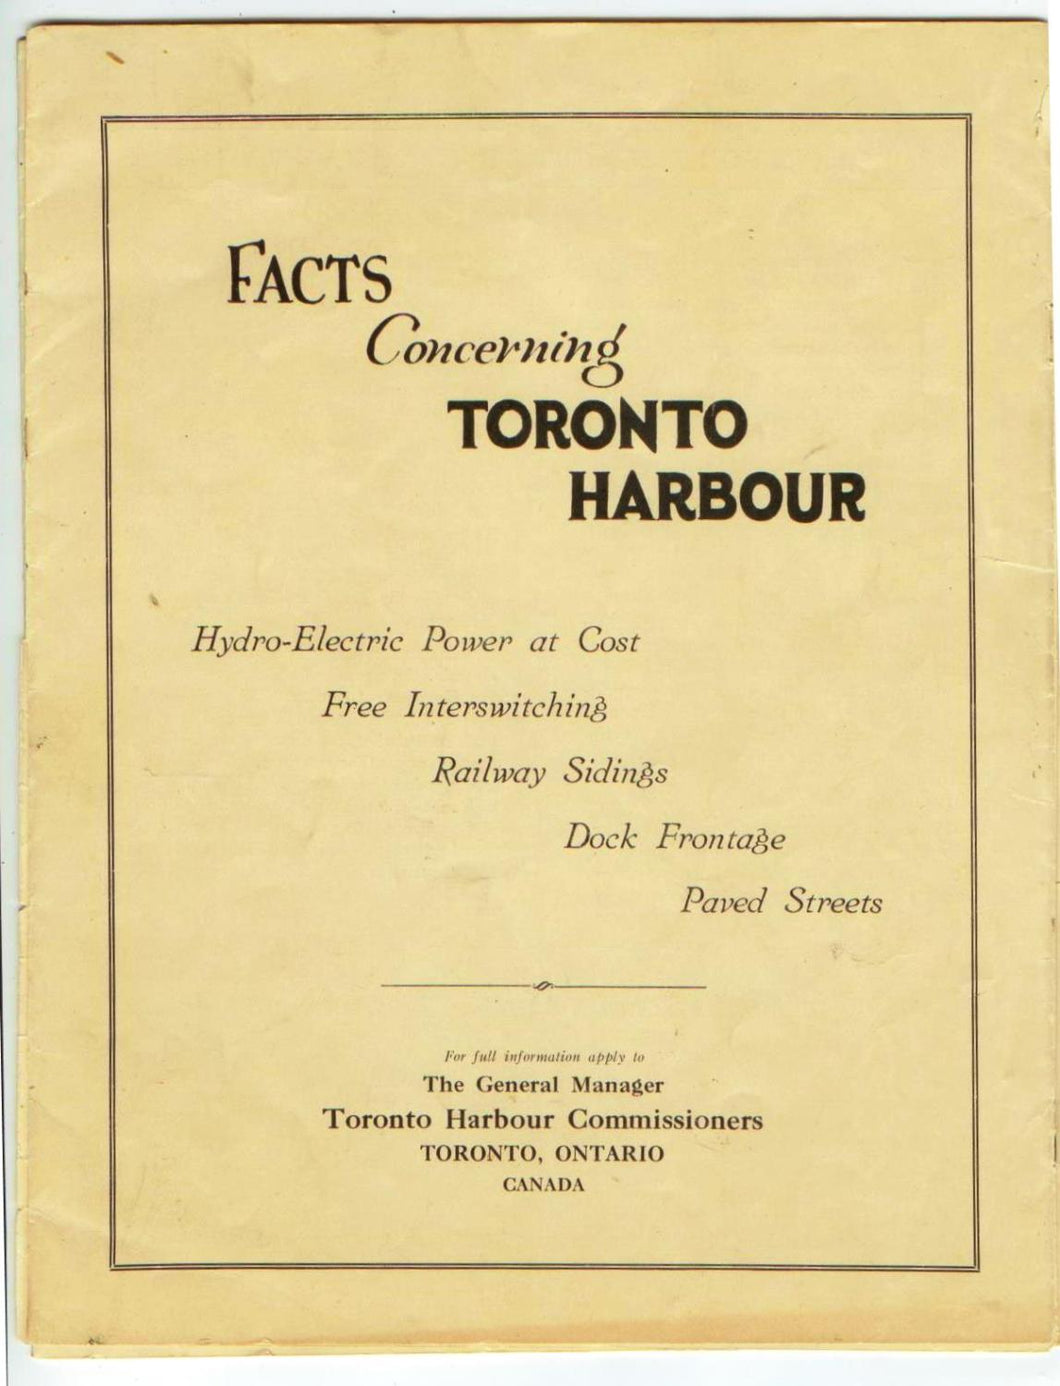 Facts Concerning Toronto Harbour